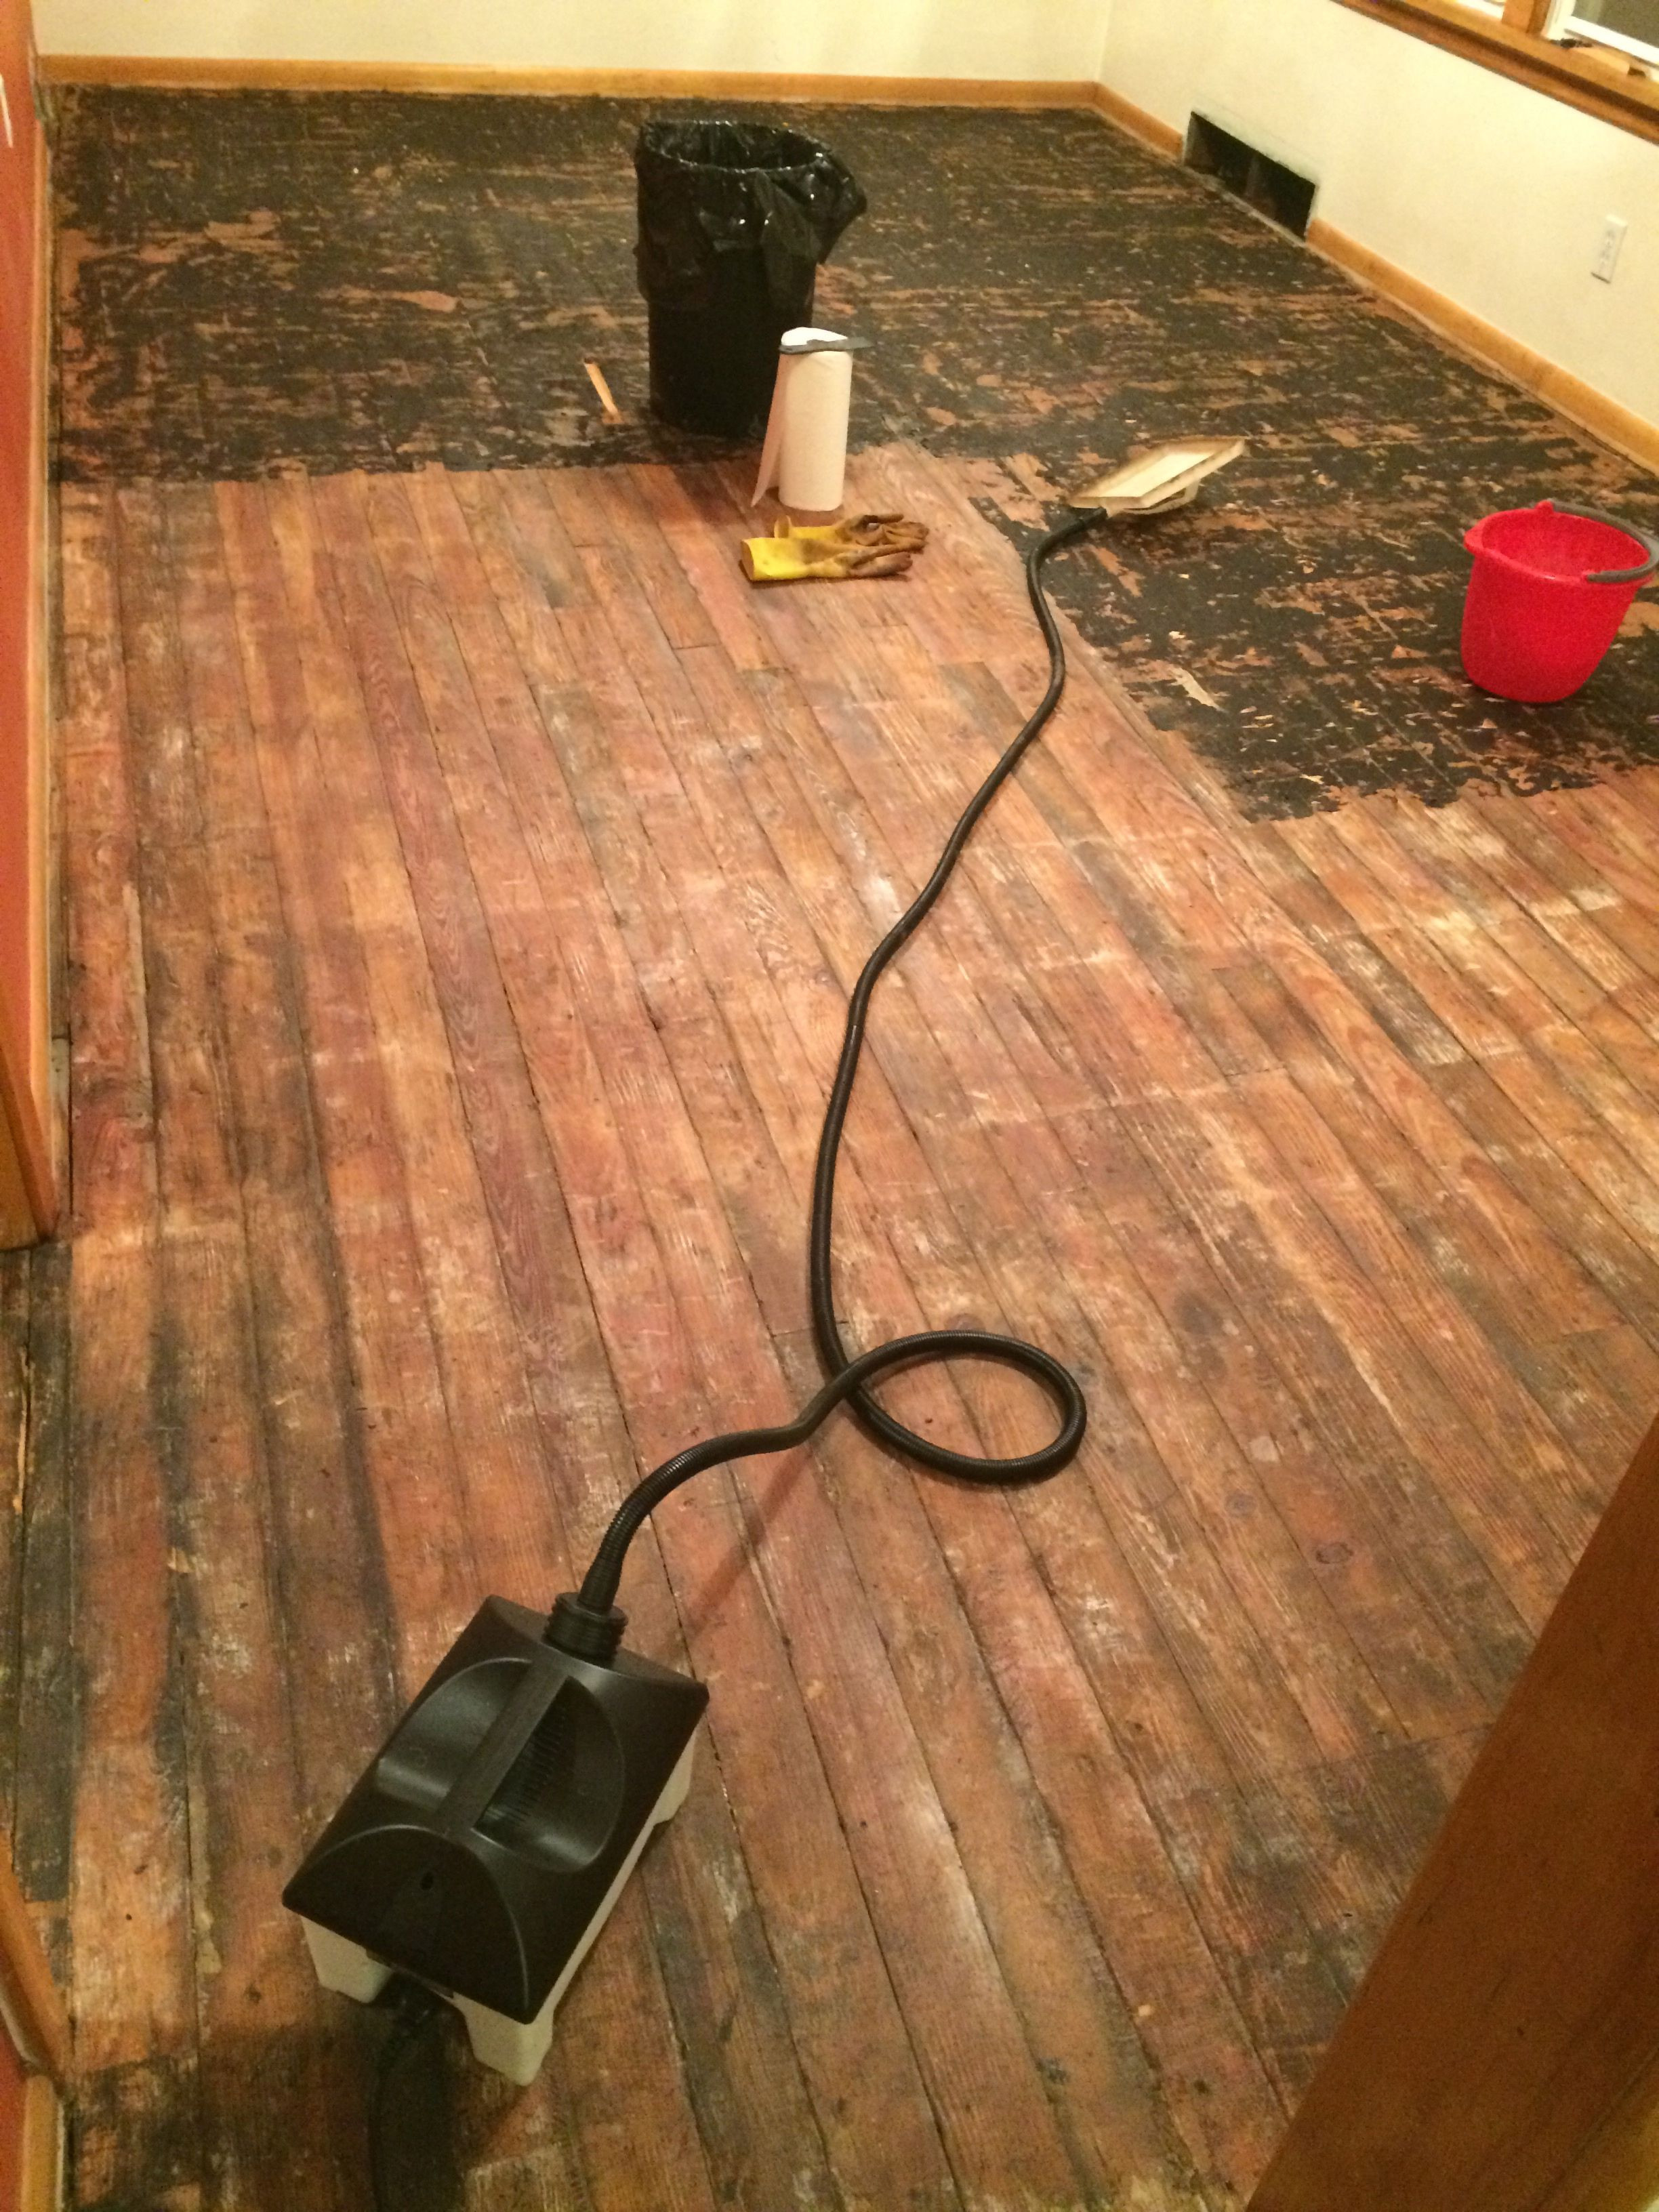 hardwood floor refinishing glen burnie md of removing laminate flooring 50 best how to remove ceramic floor tile inside removing laminate flooring removing old tar paper and glue from hardwood found under old